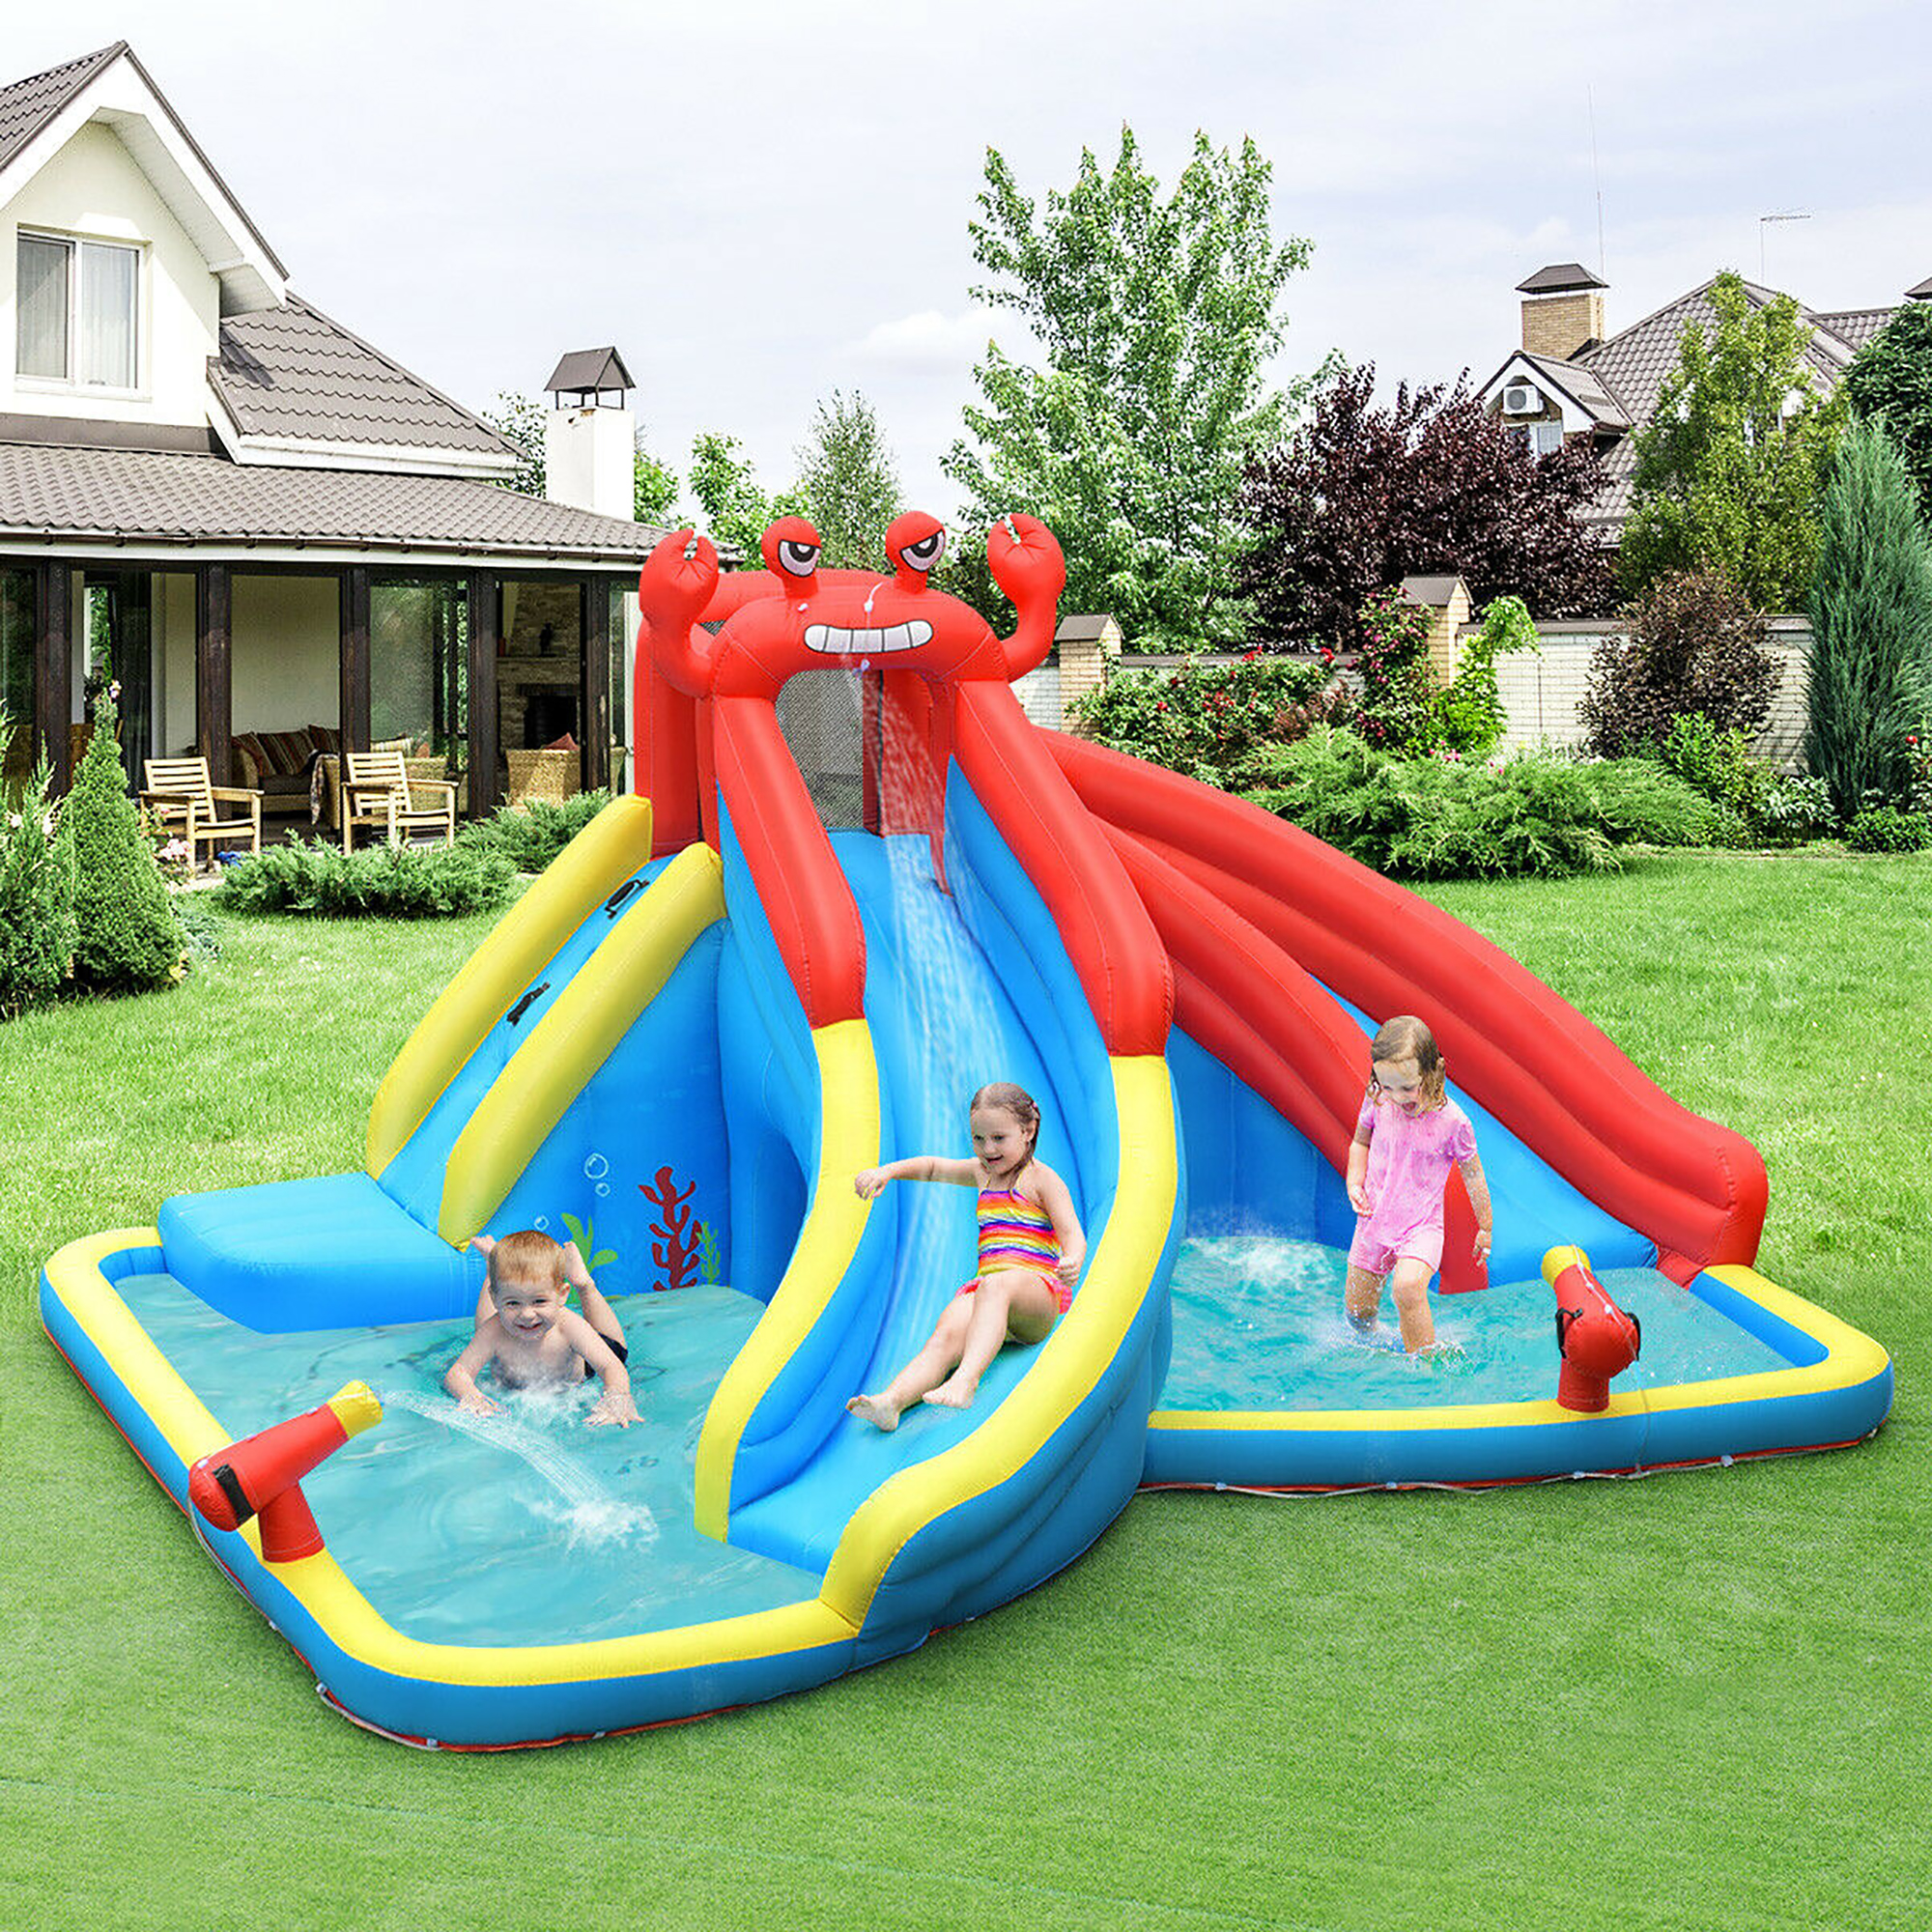 Costway Inflatable Water Slide Crab Dual Slide Bounce House Splash Pool Without Blower - image 3 of 10